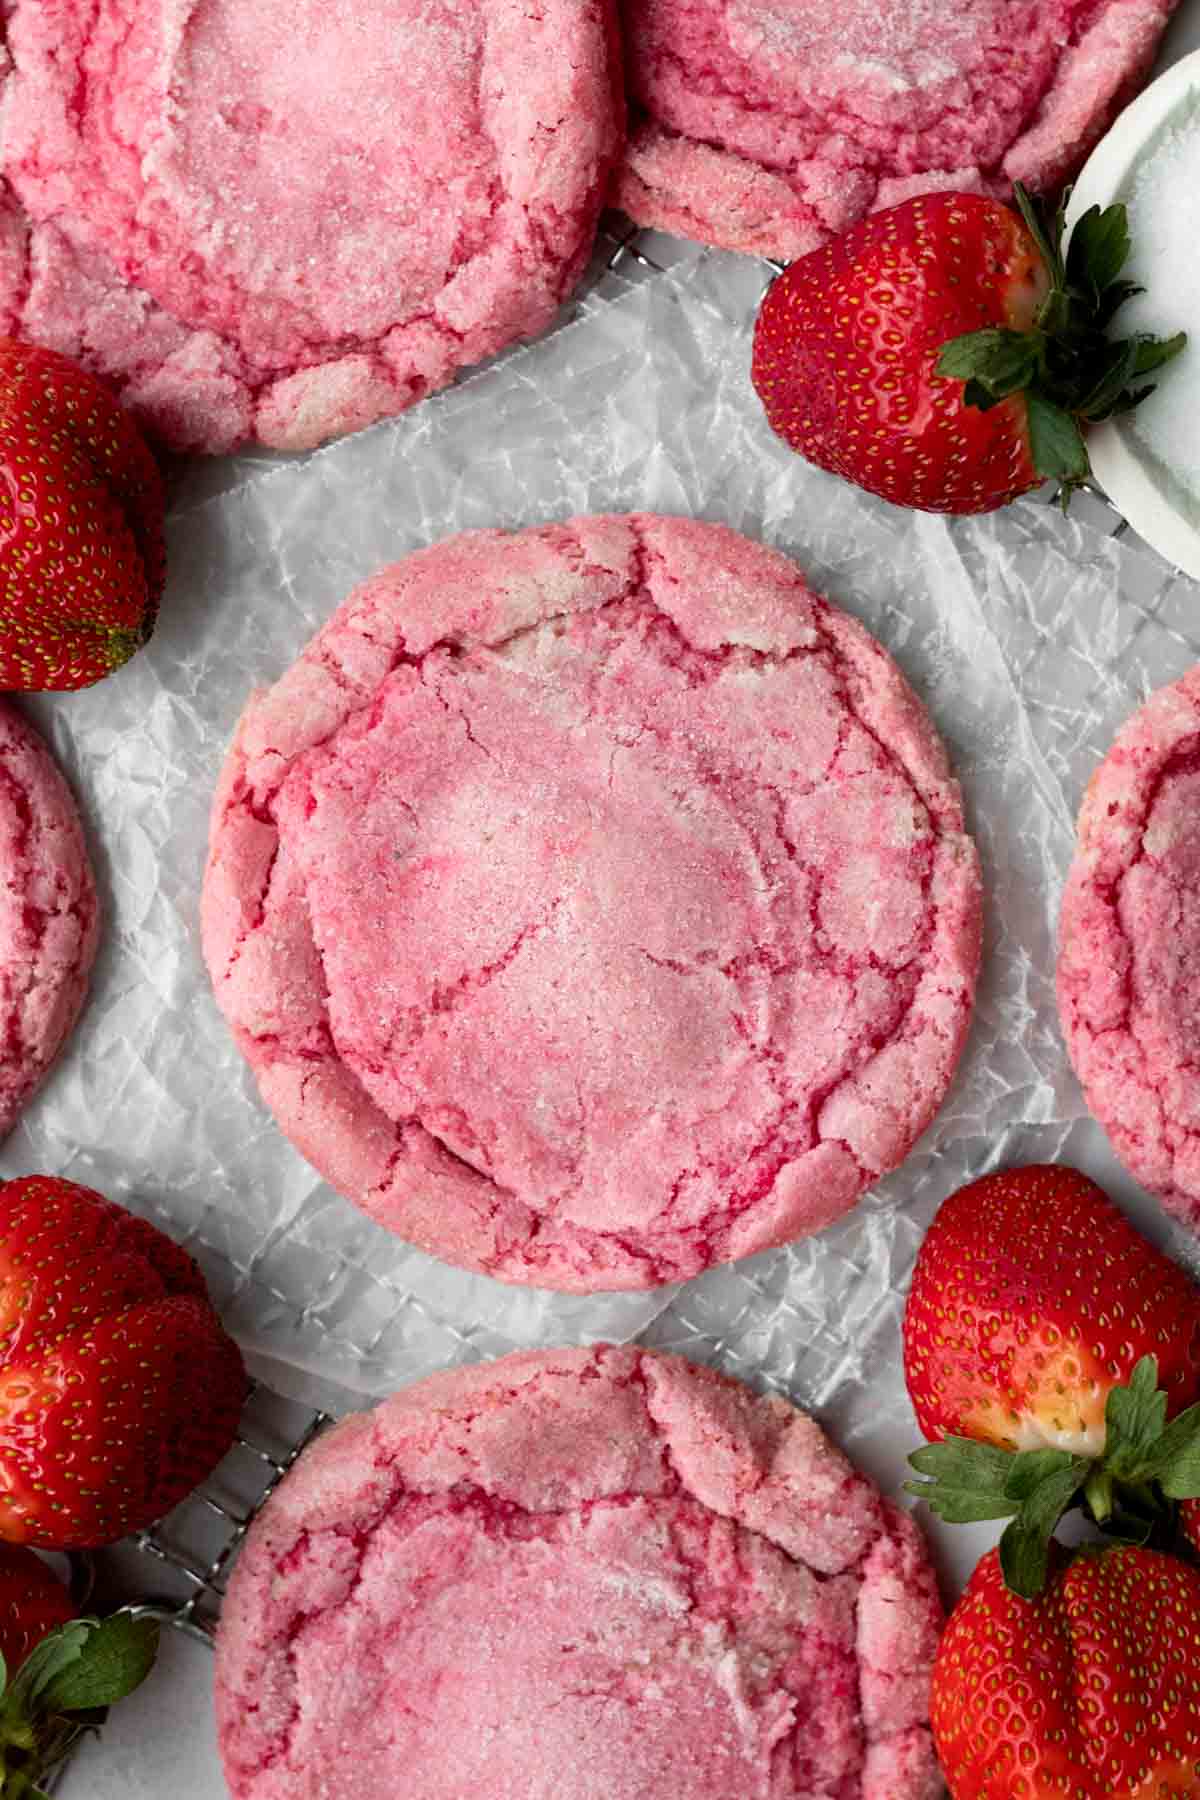 Round delicious pink Strawberry Sugar Cookie on wax paper amongst fresh strawberries.